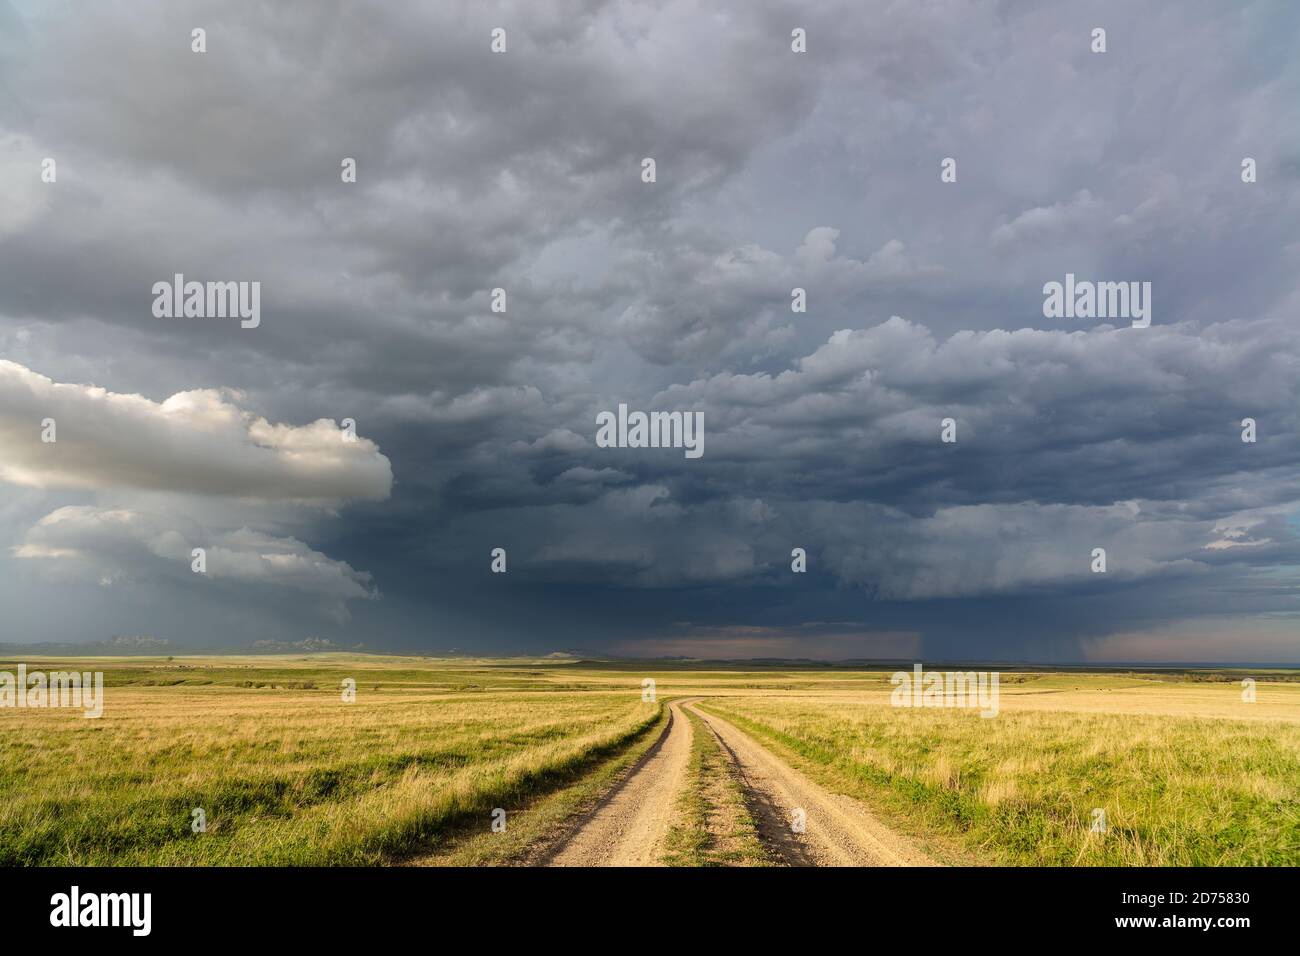 Scenic Montana landscape and dirt road through grasslands in the great plains with a stormy sky near Ekalaka Stock Photo